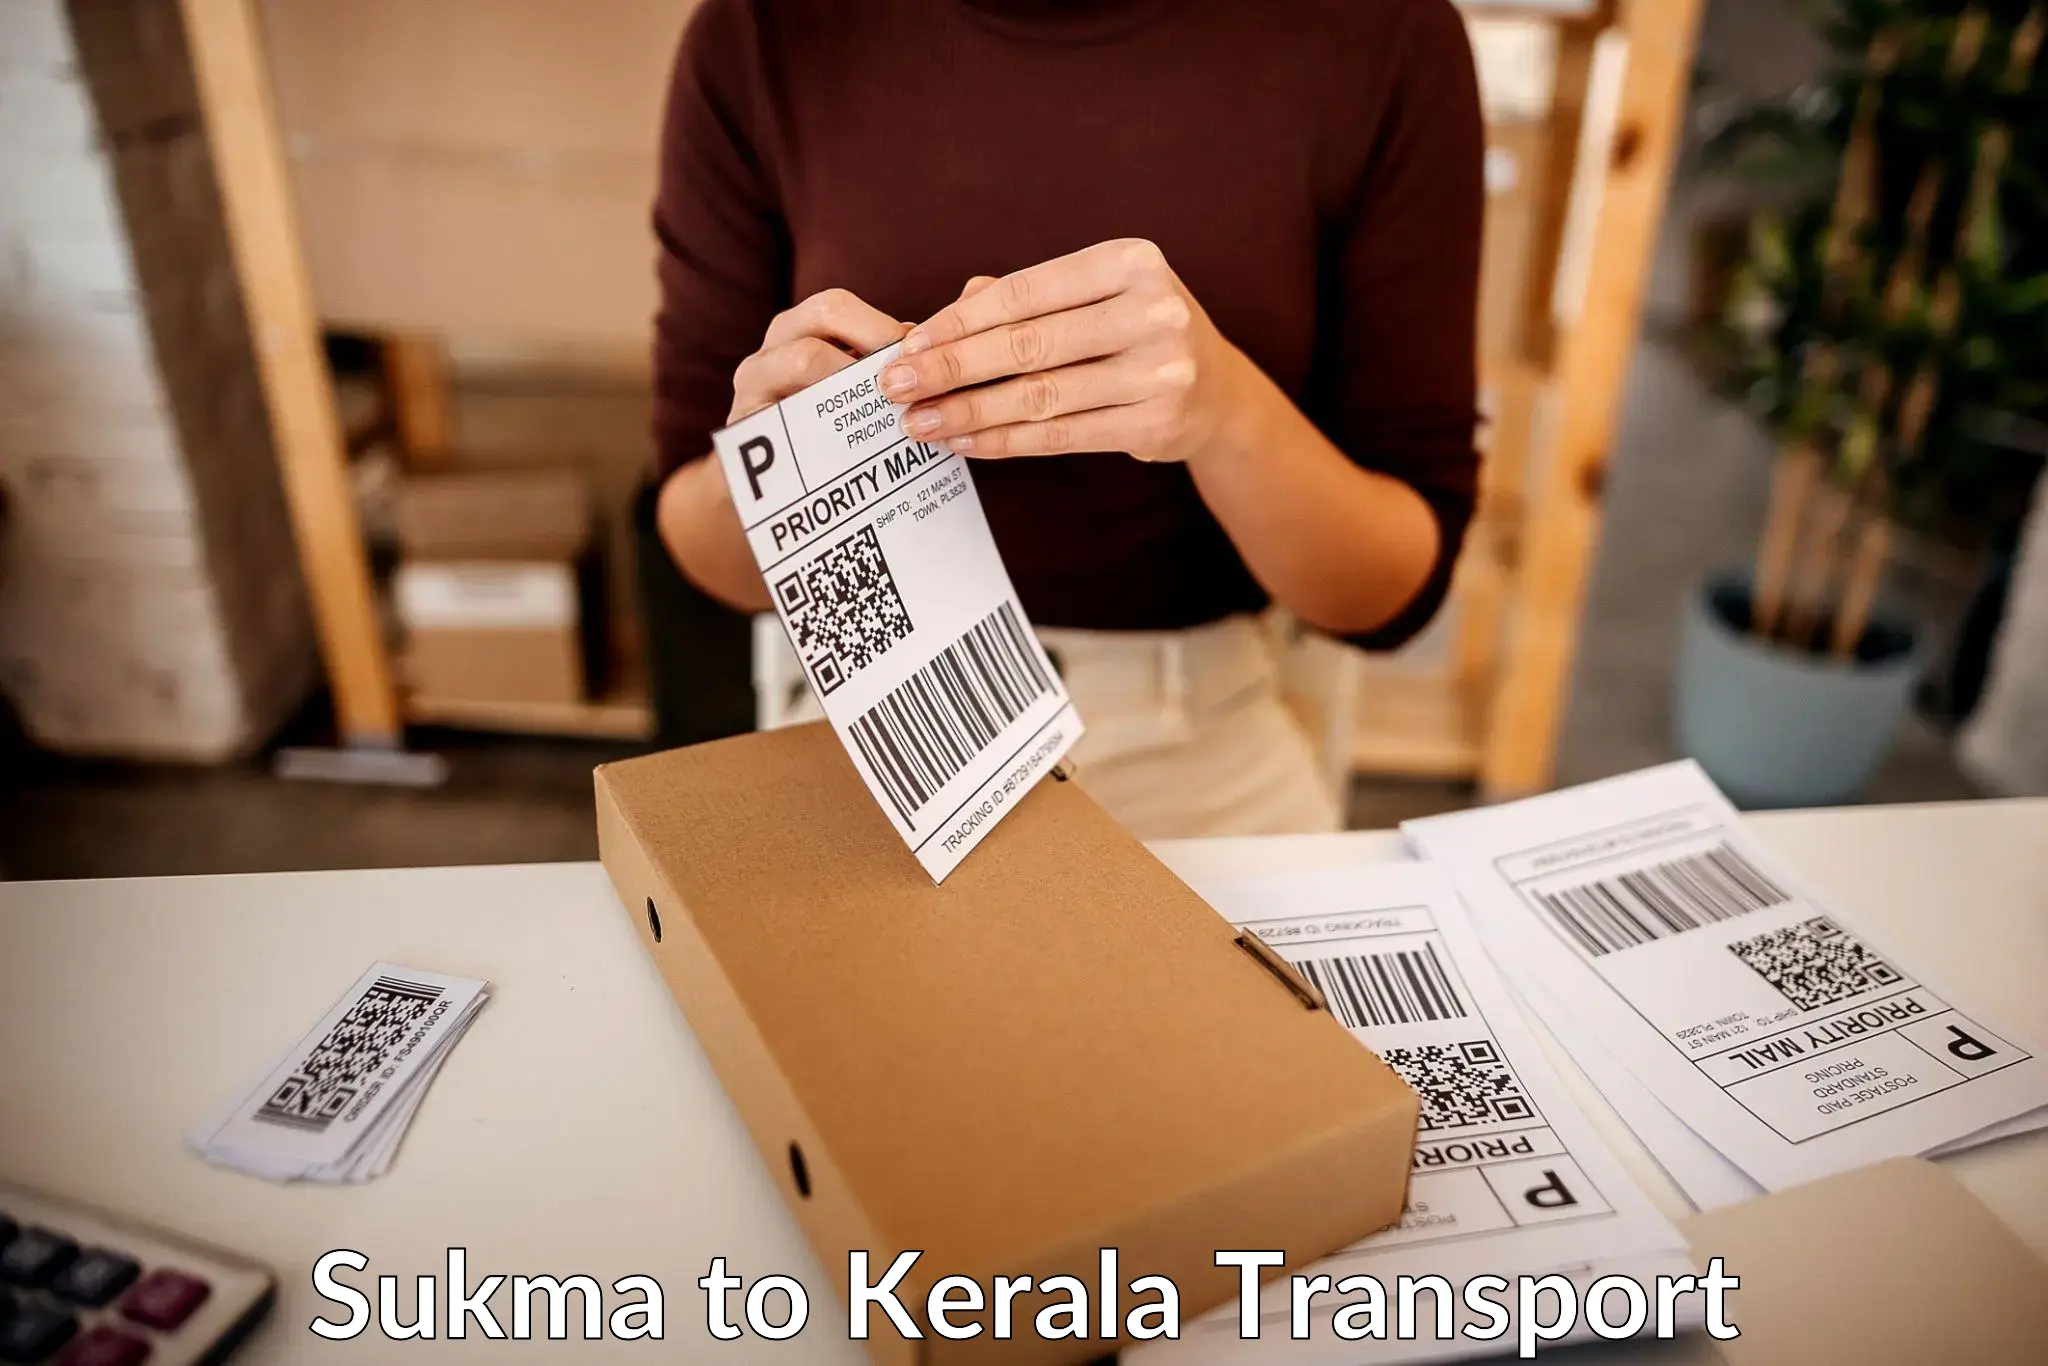 Goods delivery service Sukma to Kozhikode